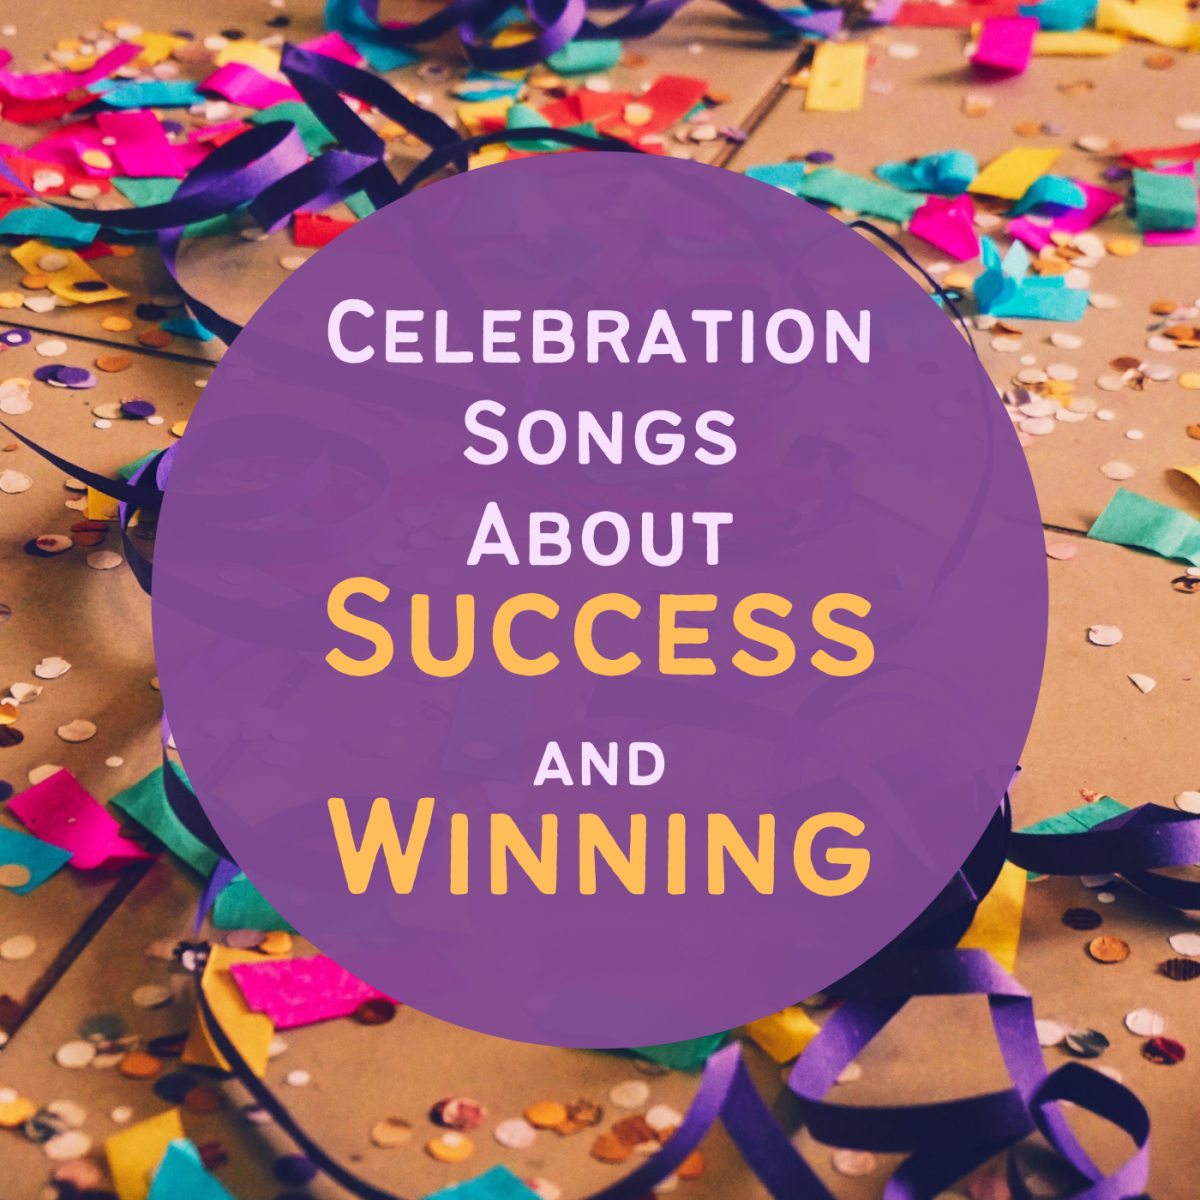 Yes, you're a winner! Now, celebrate your amazing success with a victory playlist. We've got a long list of pop, rock, and country songs to get you started.